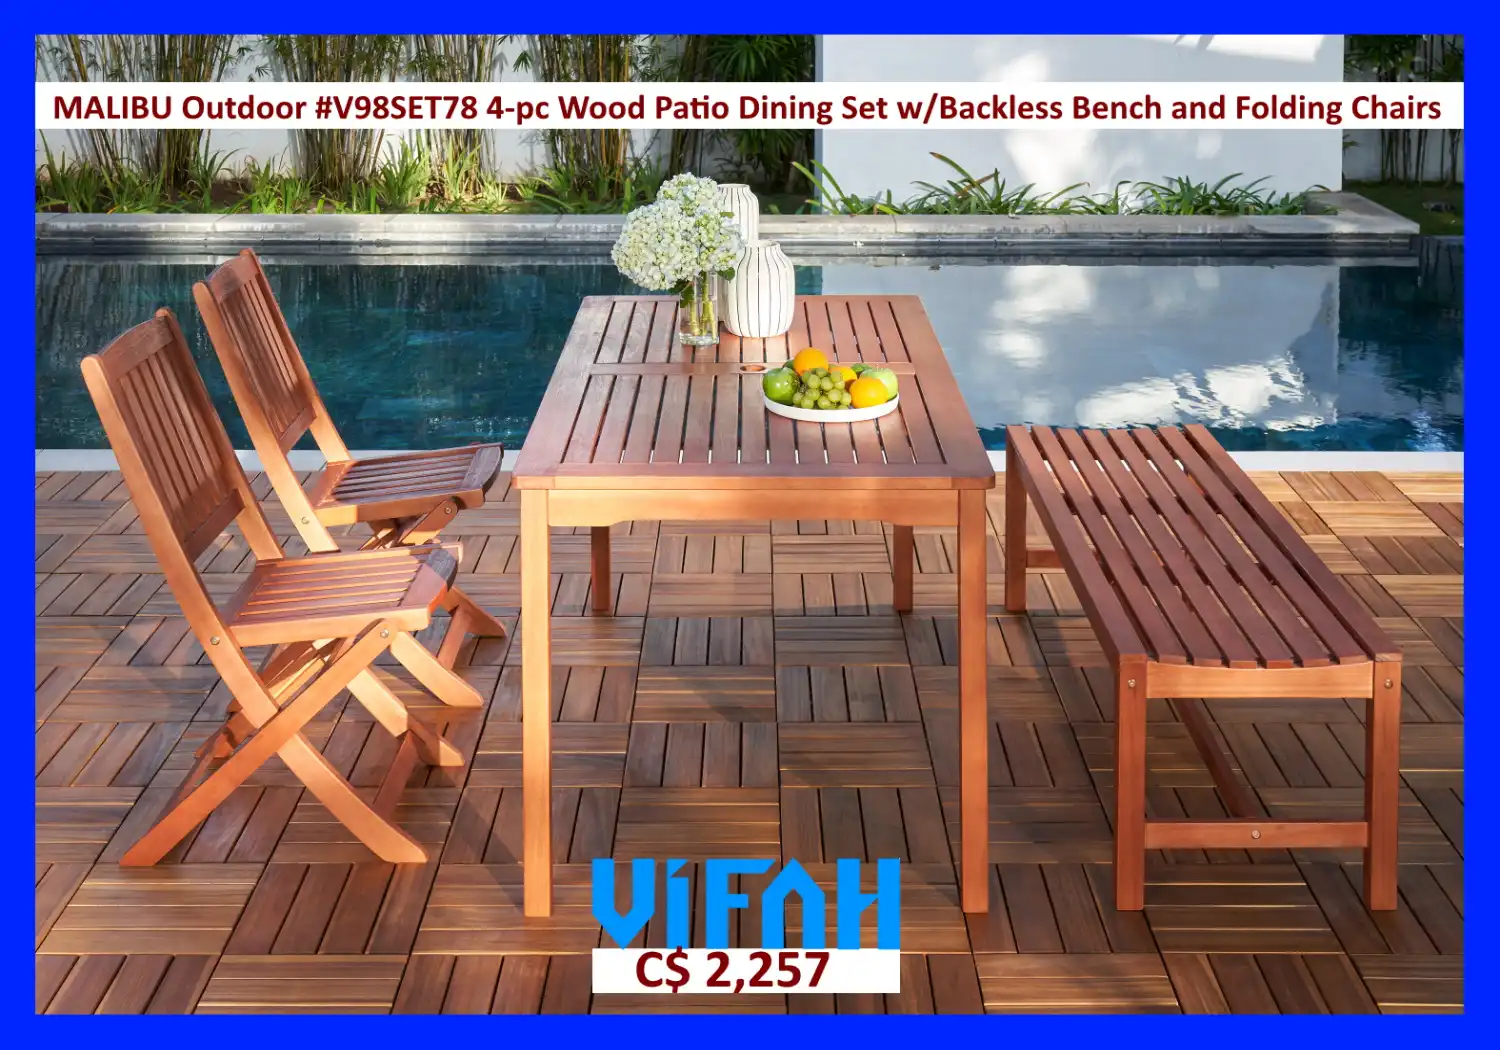 MALIBU Outdoor #V98SET78 4-piece Wood Patio Dining Set with Backless Bench and Folding Chairs